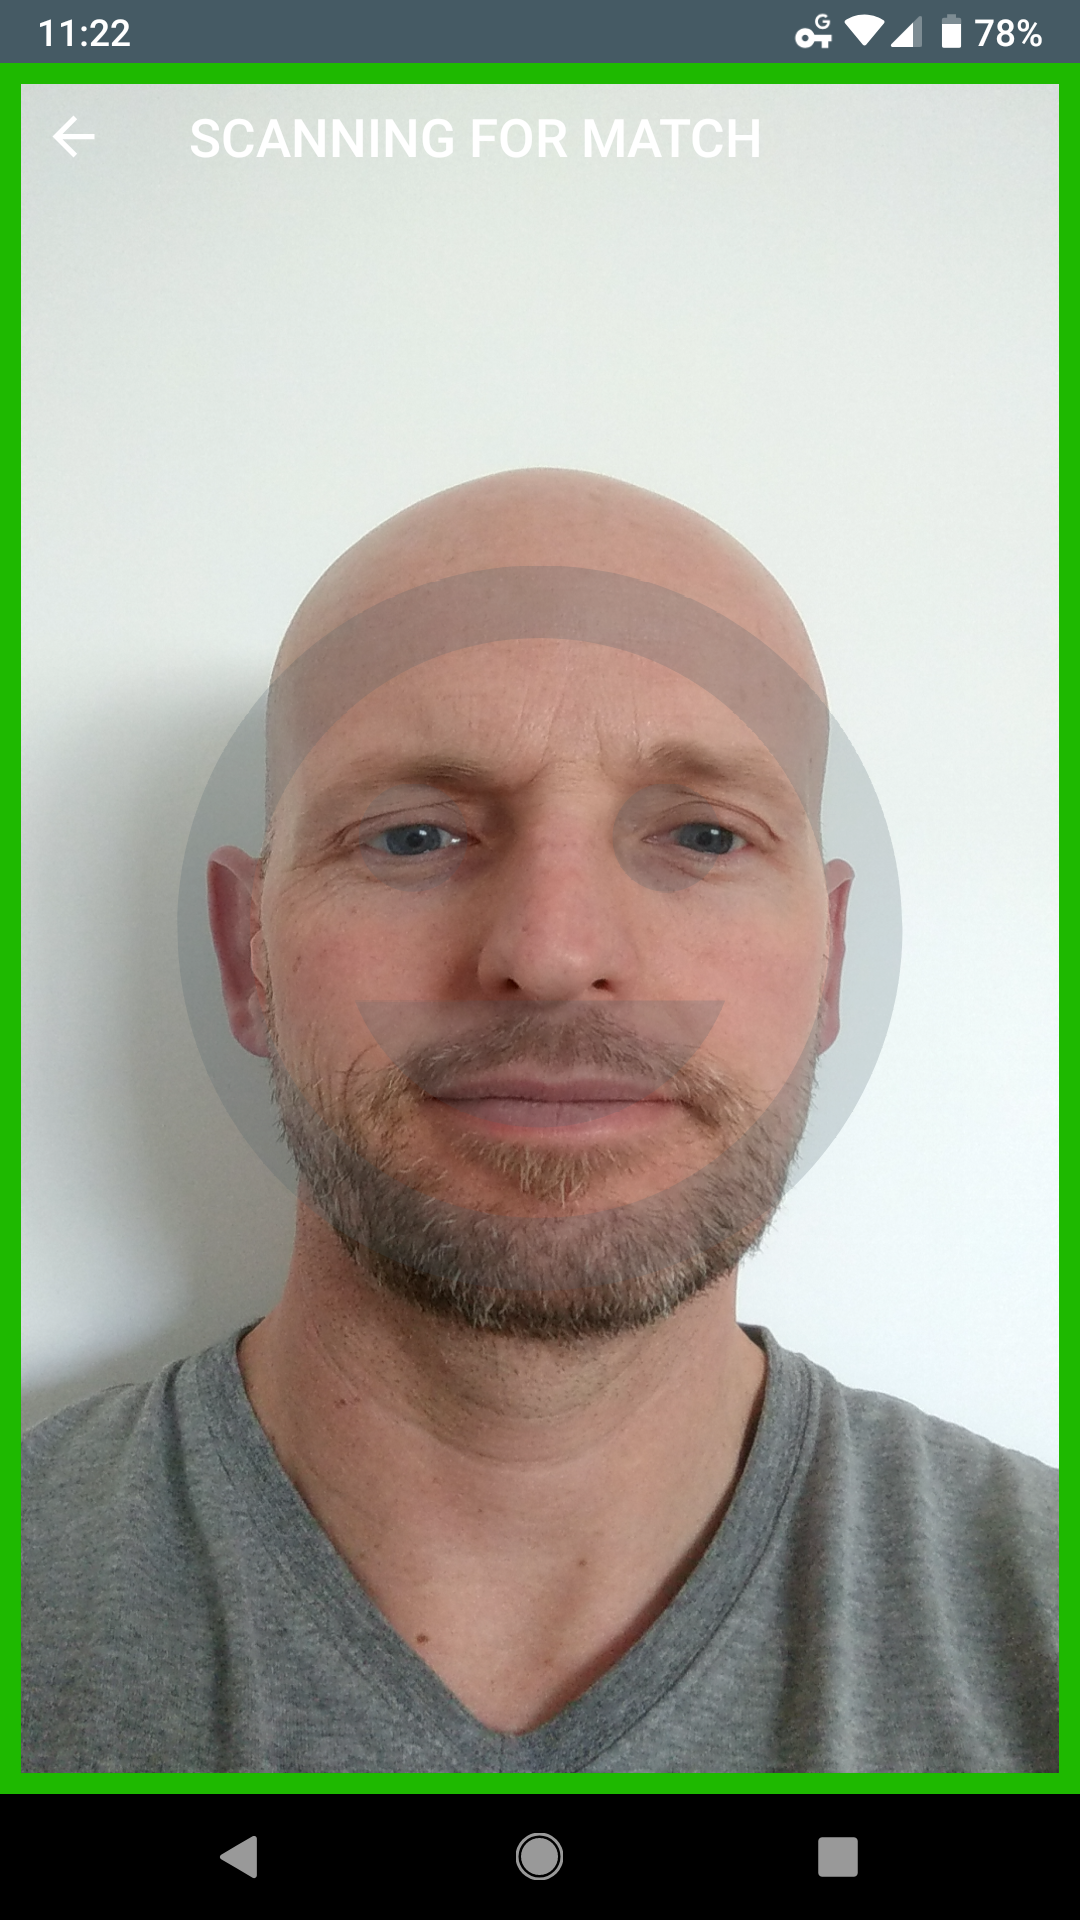 Mobile face recognition